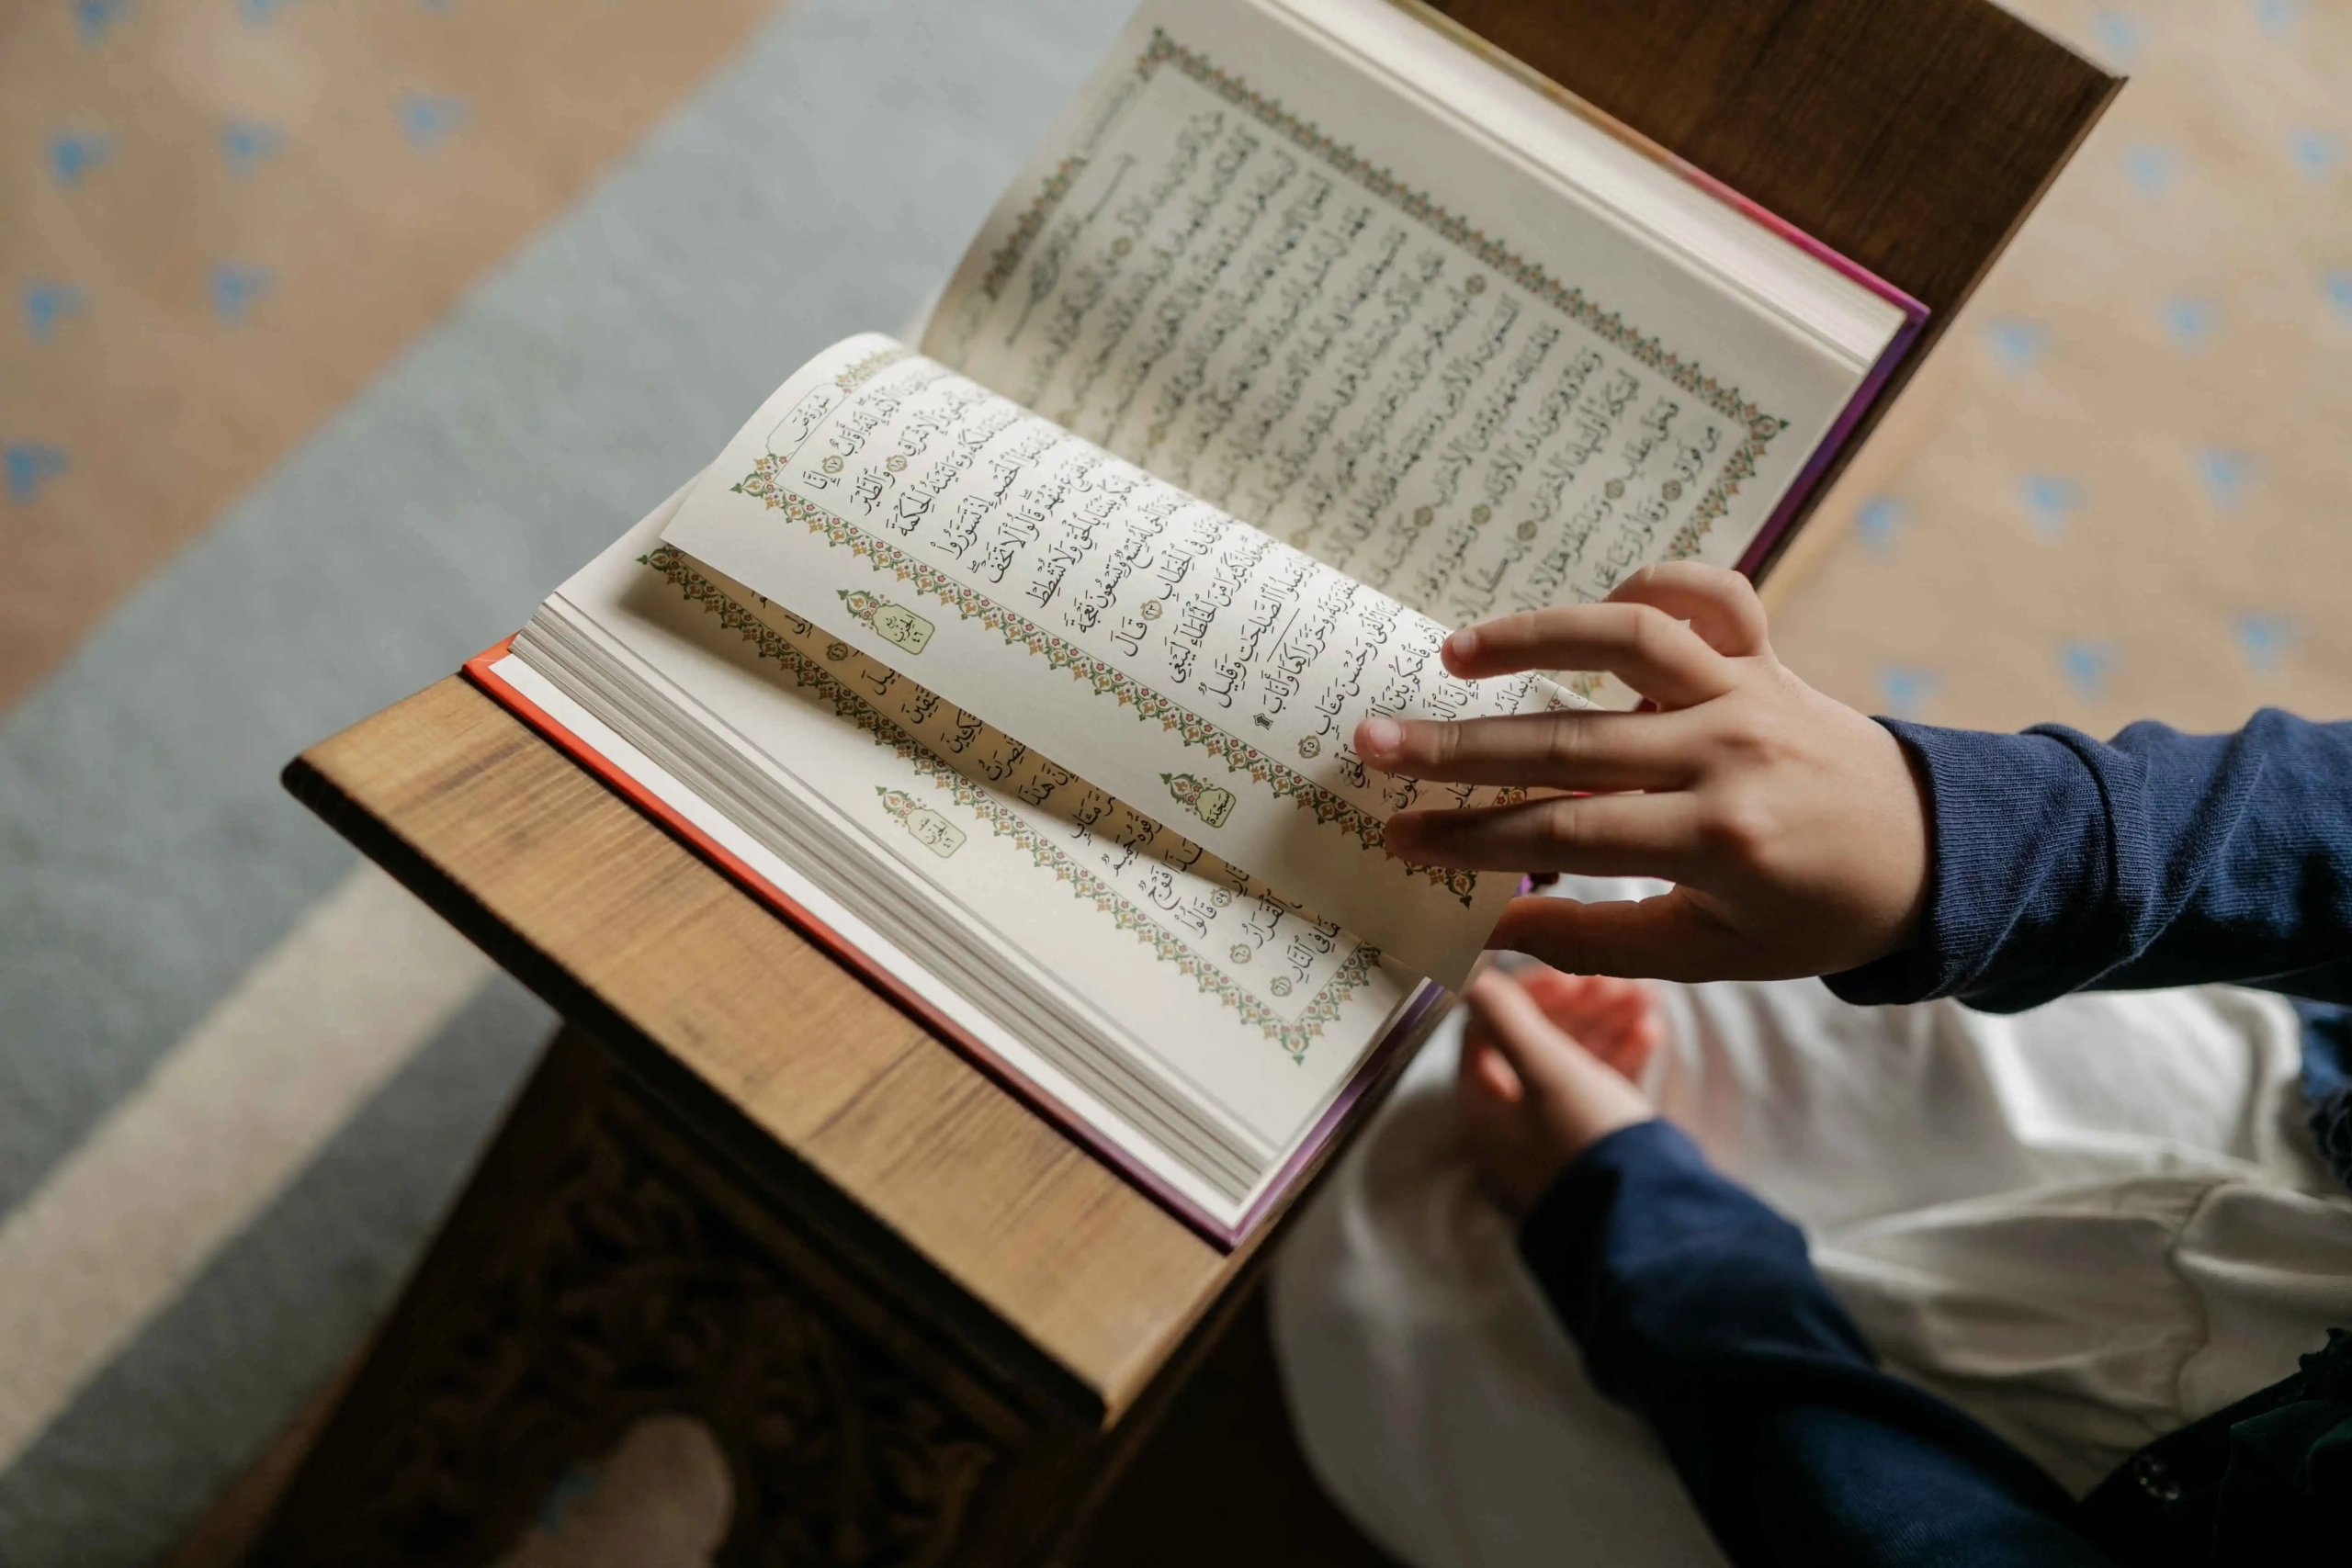 A young Muslim woman reciting the Quran